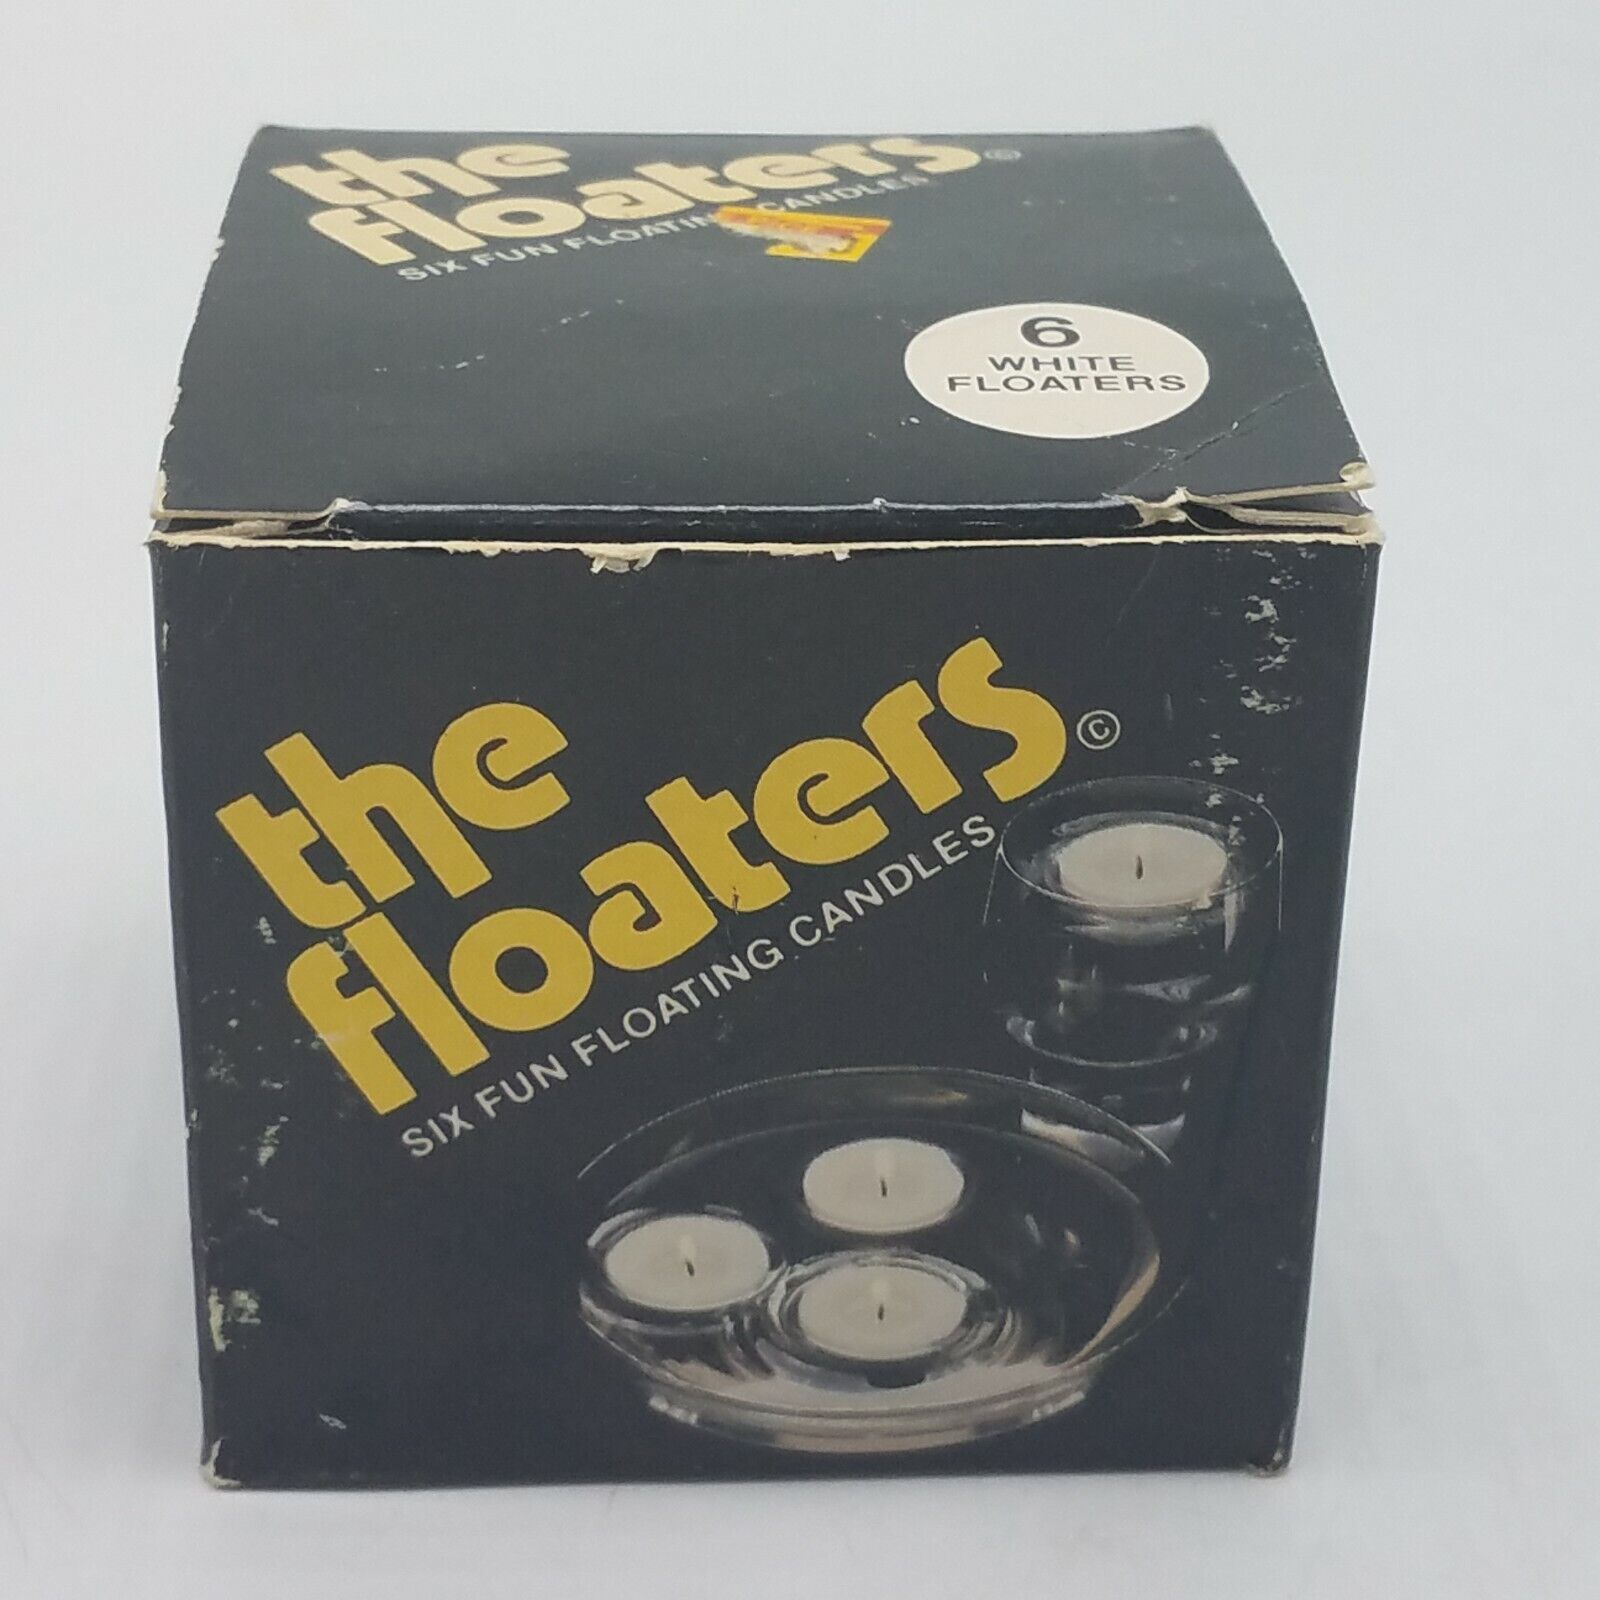 Vtg 1976 The Floaters Candles Un-Candle Colonial Candle Of Cape Cod NOS New